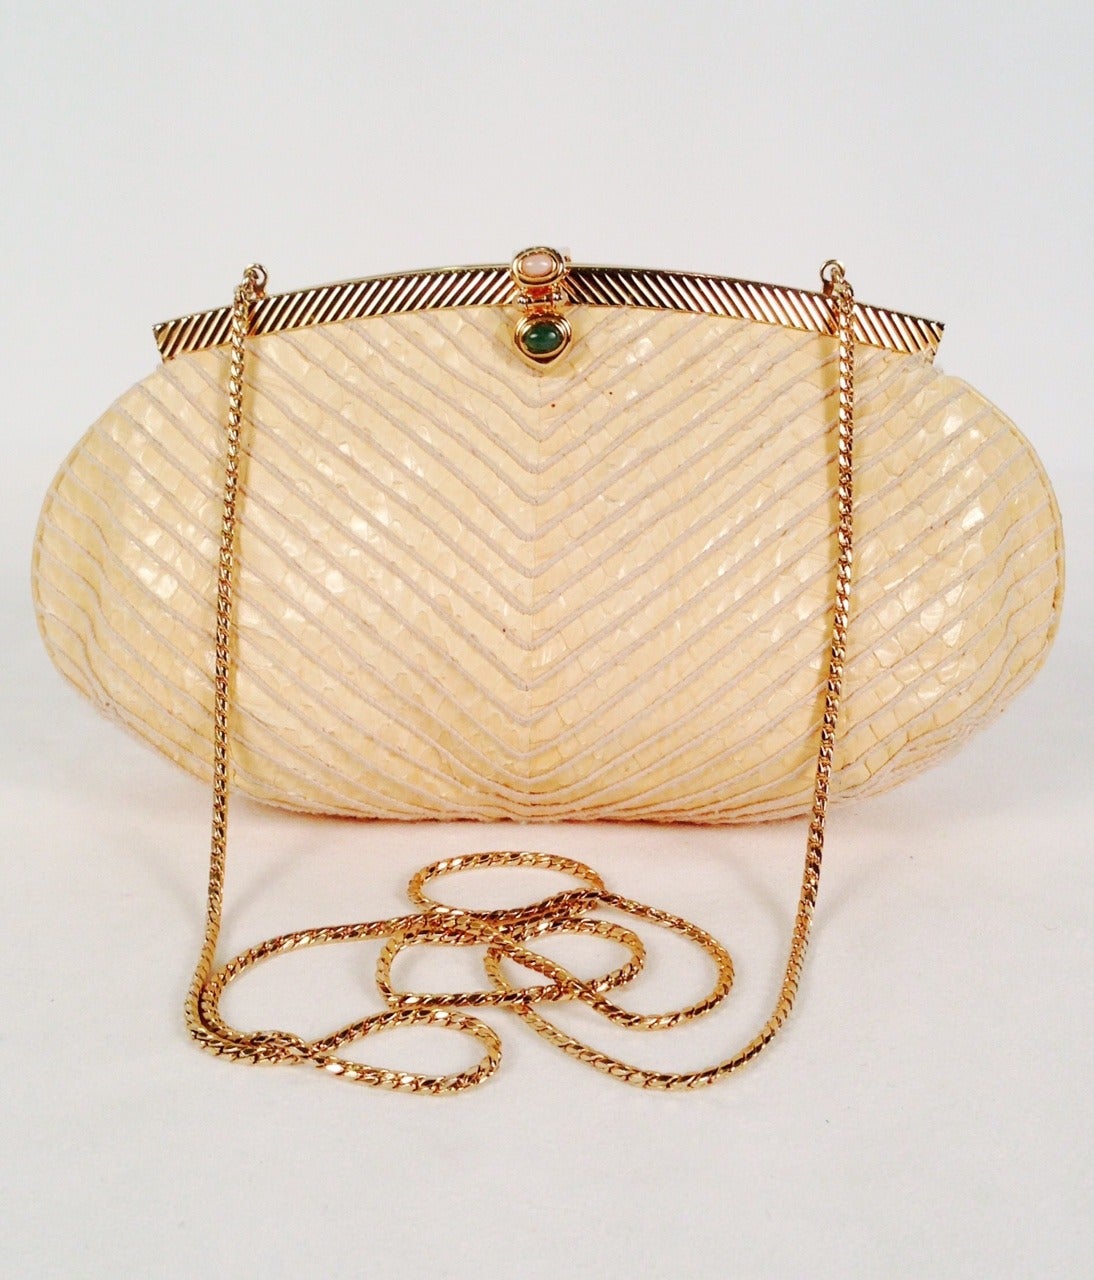 Vintage Judith Leiber French Vanilla Python Bag With Jeweled Clasp In Excellent Condition For Sale In Palm Beach, FL